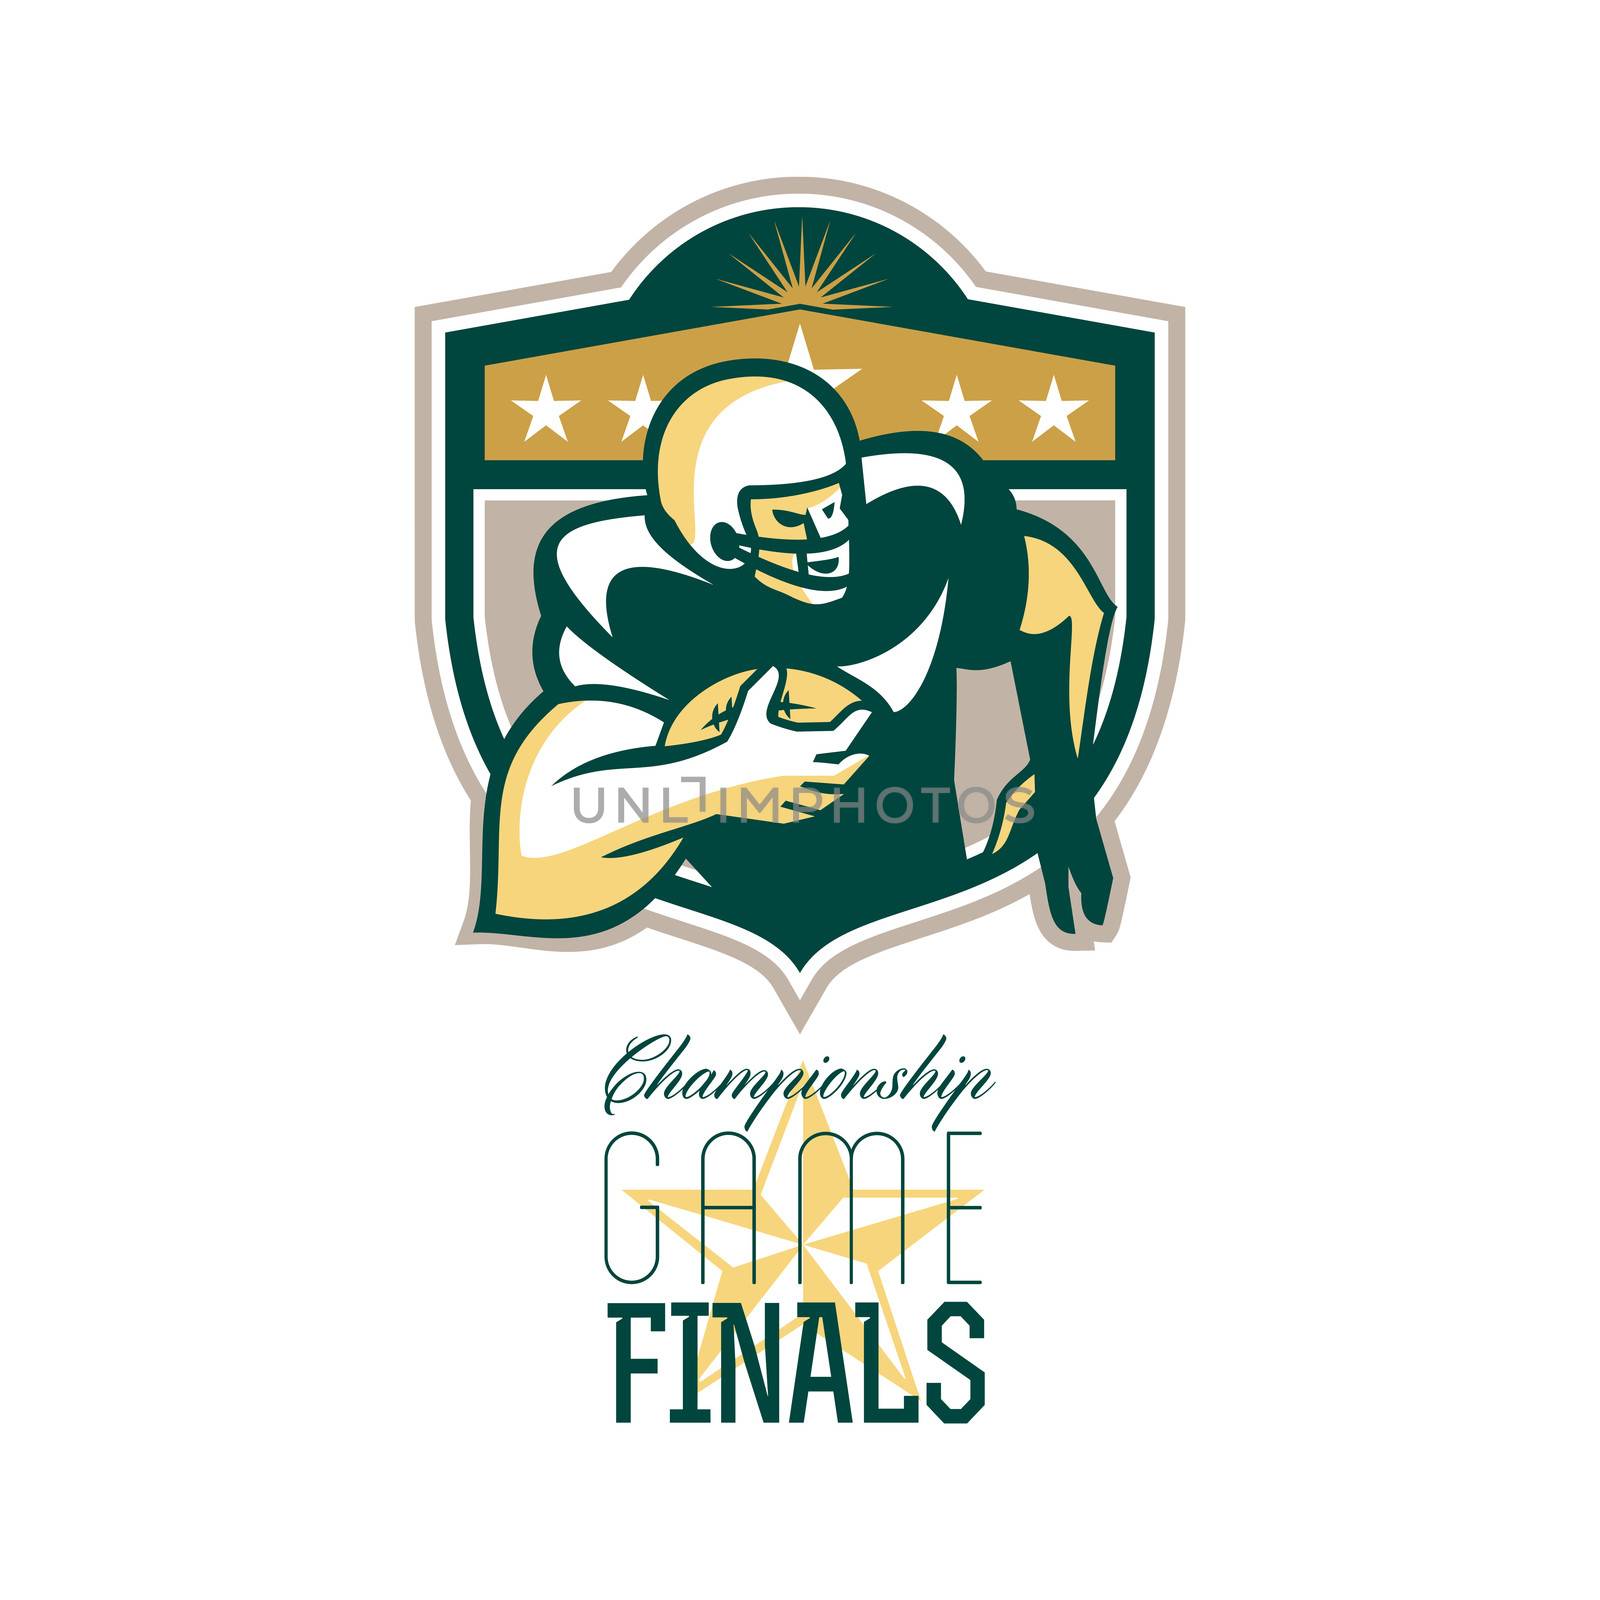 Illustration of an american football gridiron wide receiver running back player running with ball facing side set inside shield with stars done in retro style with words Championship Game Finals.